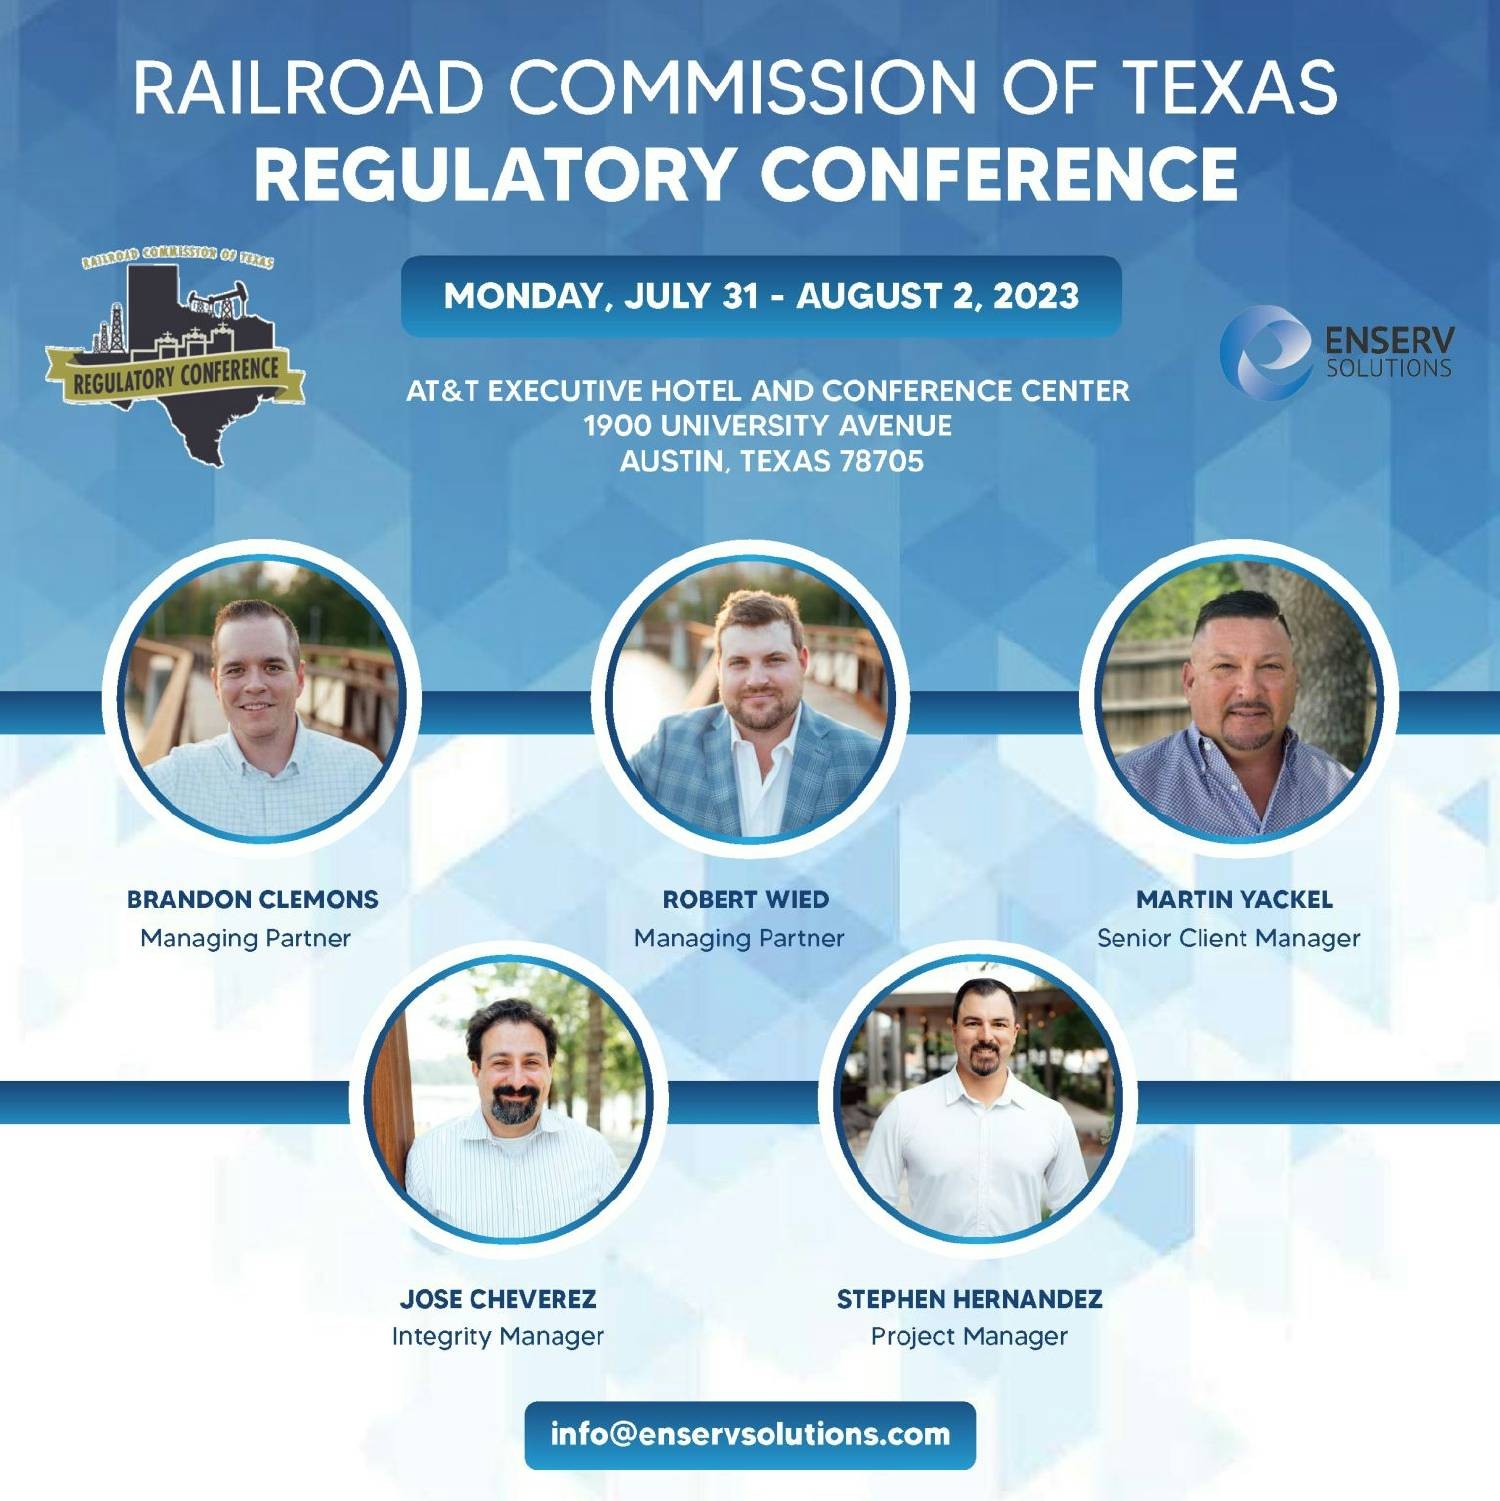 EnServ team at the 2023 Railroad Commission of Texas Regulatory Conference in July / August 2023.